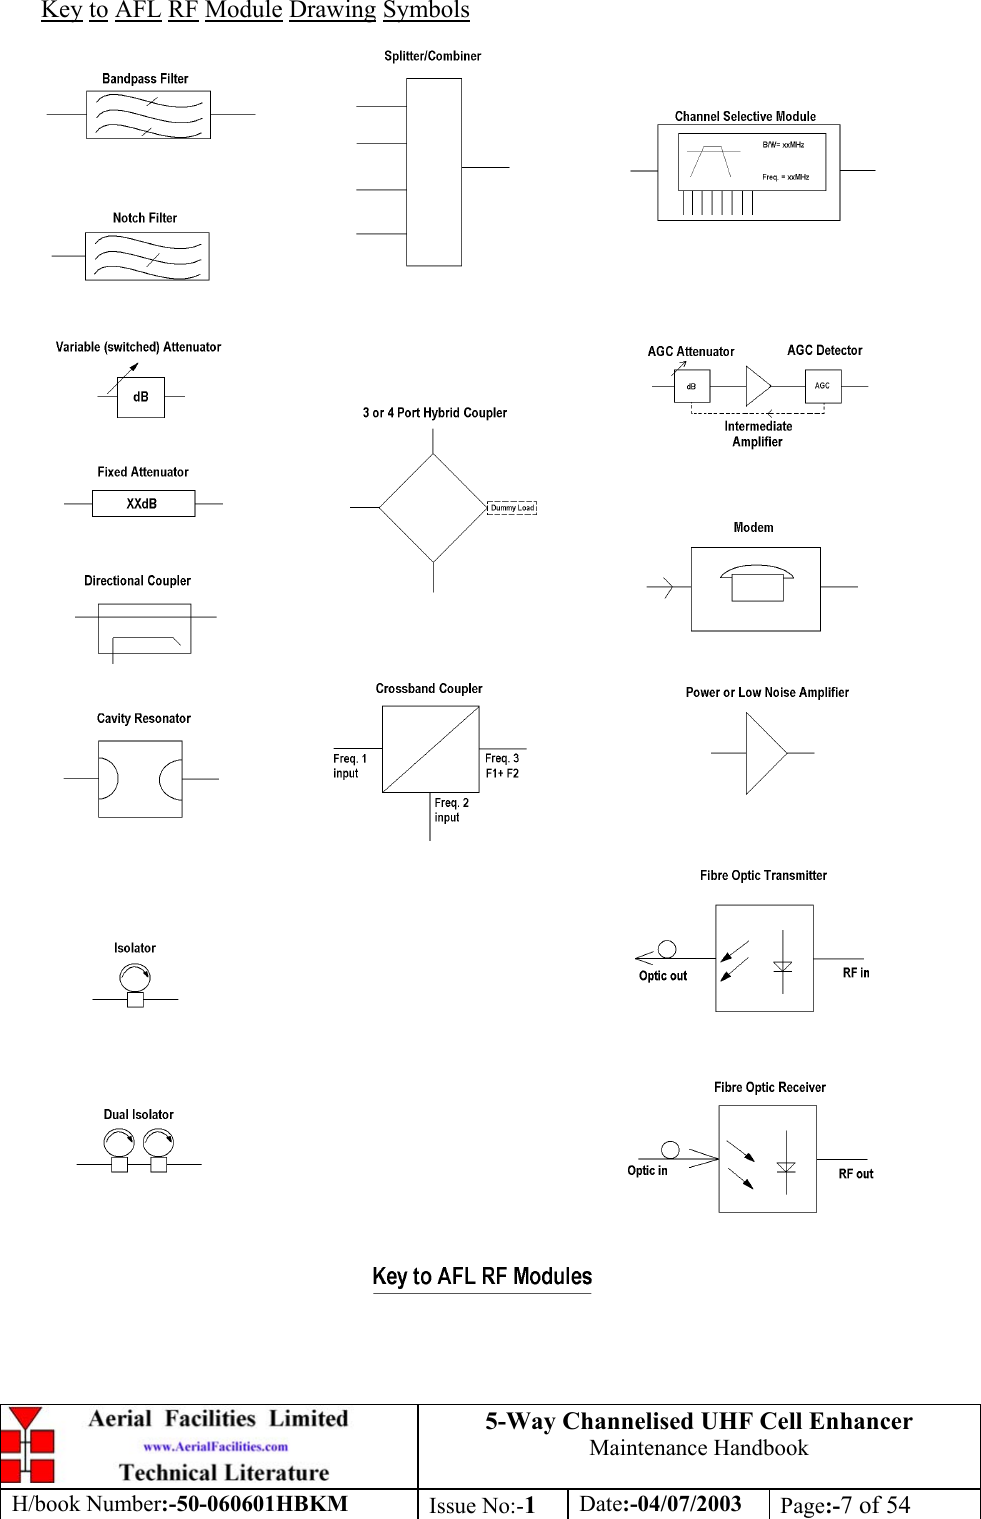 5-Way Channelised UHF Cell EnhancerMaintenance HandbookH/book Number:-50-060601HBKM Issue No:-1Date:-04/07/2003 Page:-7 of 54Key to AFL RF Module Drawing Symbols